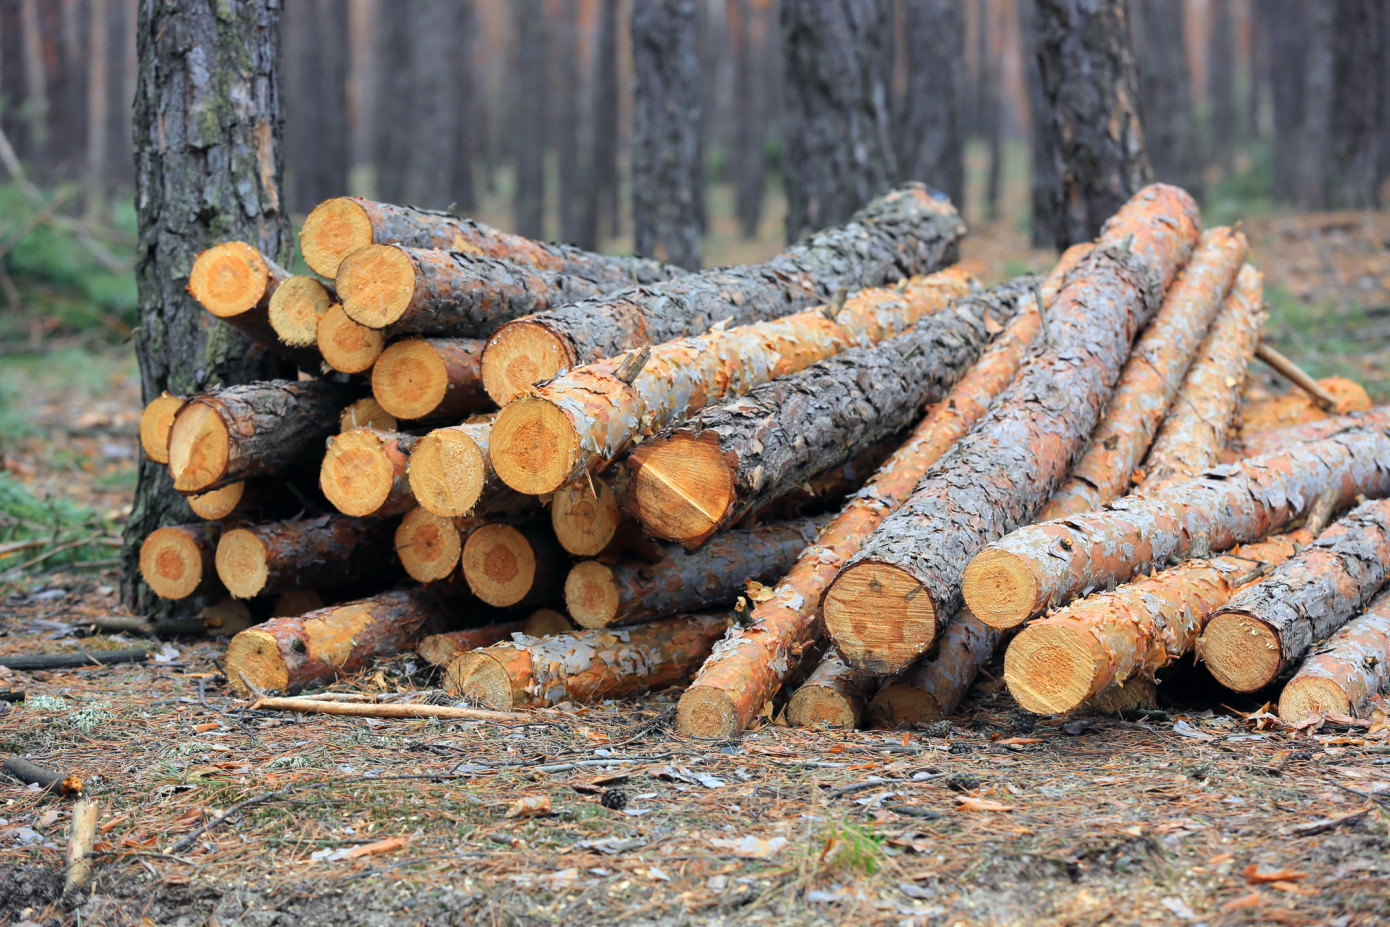 In March, price for logs exported from Lithuania adds 0.5%